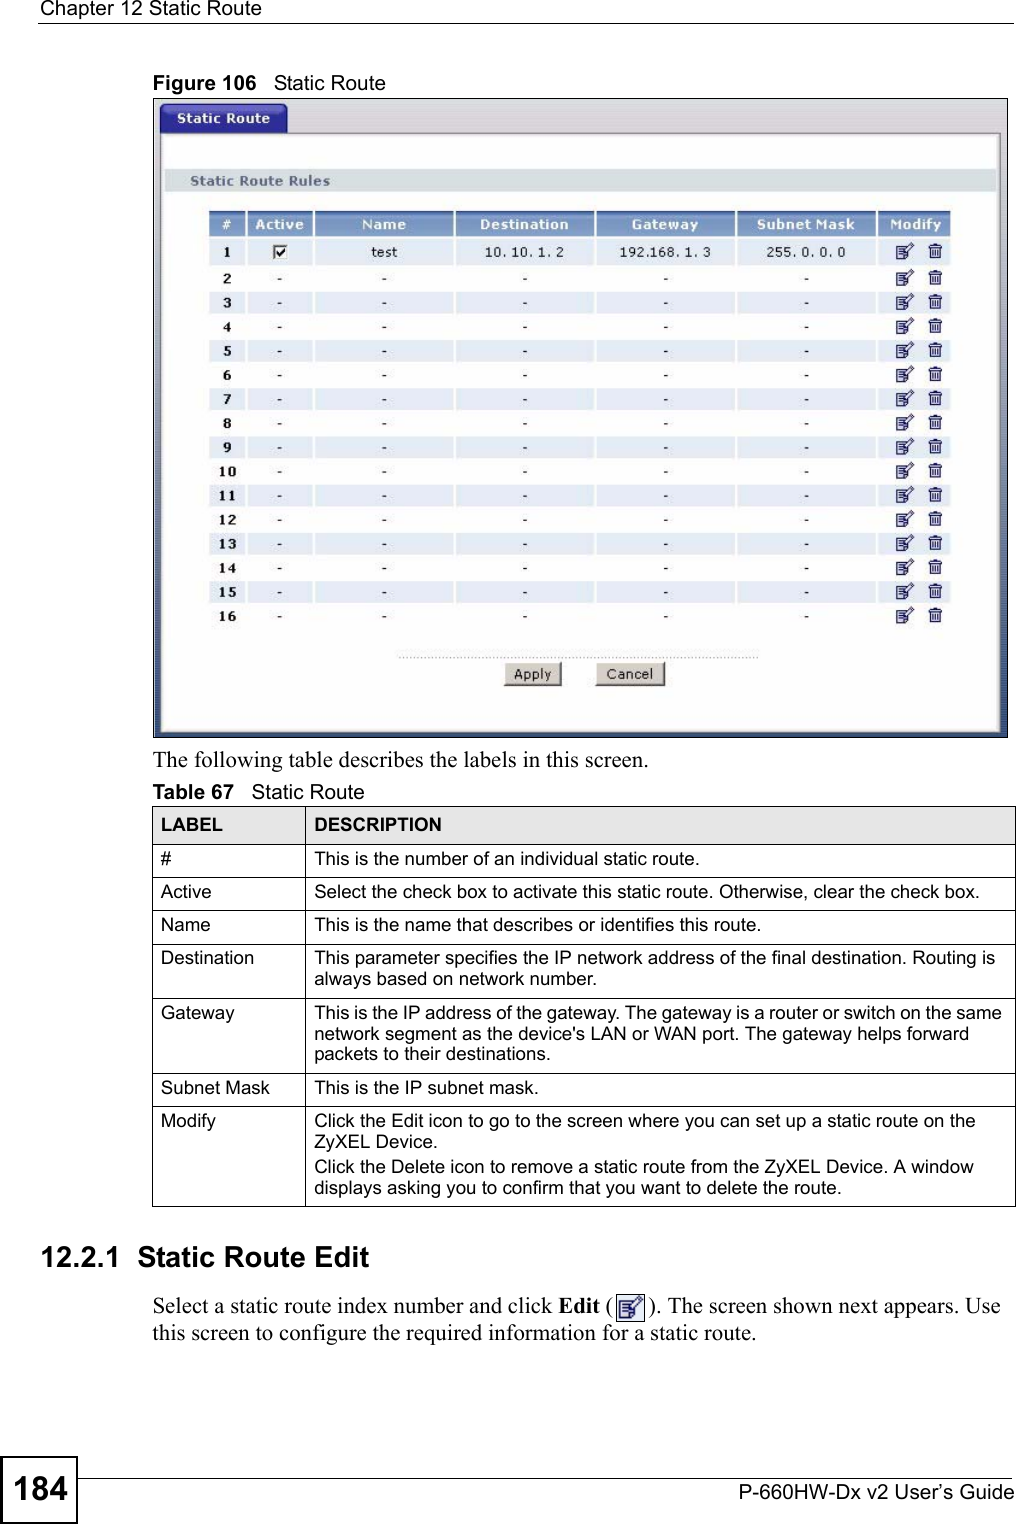 Chapter 12 Static RouteP-660HW-Dx v2 User’s Guide184Figure 106   Static RouteThe following table describes the labels in this screen. 12.2.1  Static Route Edit   Select a static route index number and click Edit ( ). The screen shown next appears. Use this screen to configure the required information for a static route.Table 67   Static RouteLABEL DESCRIPTION#This is the number of an individual static route.Active Select the check box to activate this static route. Otherwise, clear the check box.Name This is the name that describes or identifies this route. Destination This parameter specifies the IP network address of the final destination. Routing is always based on network number. Gateway This is the IP address of the gateway. The gateway is a router or switch on the same network segment as the device&apos;s LAN or WAN port. The gateway helps forward packets to their destinations.Subnet Mask This is the IP subnet mask.Modify Click the Edit icon to go to the screen where you can set up a static route on the ZyXEL Device.Click the Delete icon to remove a static route from the ZyXEL Device. A window displays asking you to confirm that you want to delete the route. 